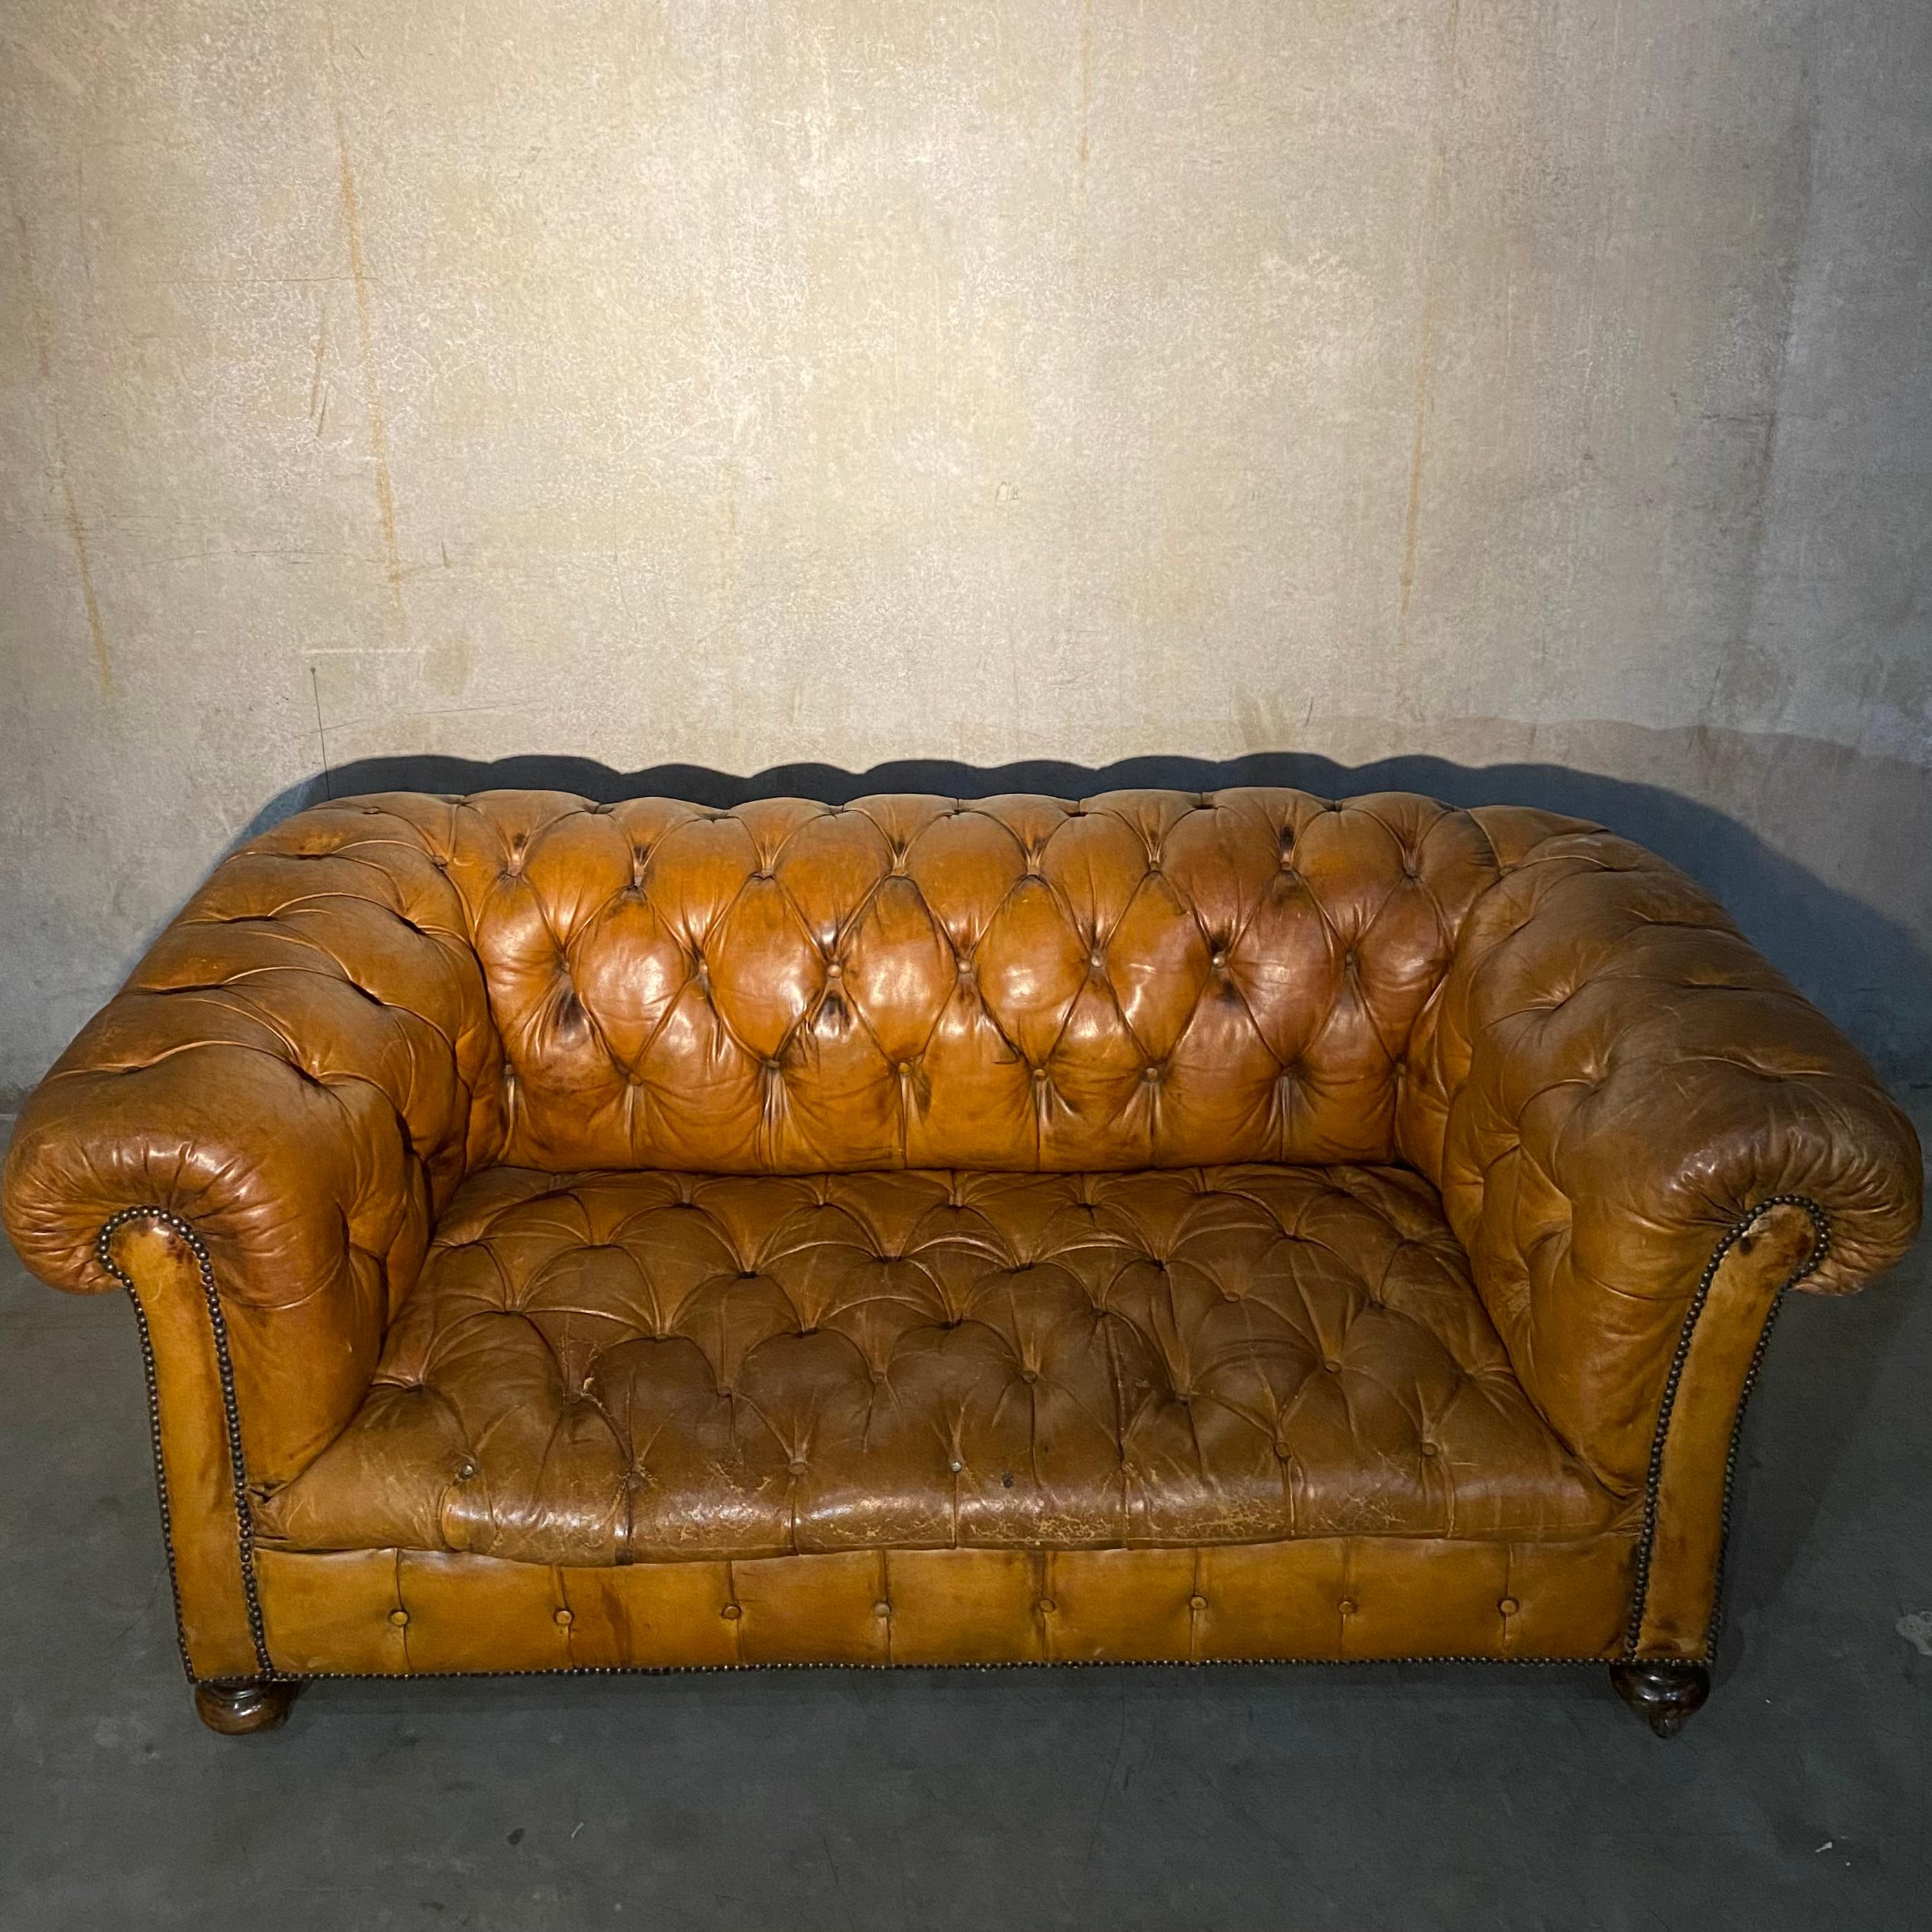 A very good true leather tufted sofa in old worn, perfect patina. Solid seating. Good overall condition and very rare find. Acquired from a private collection of old antique dealer who imported to Canada in the 50's.

Not perfect but very very